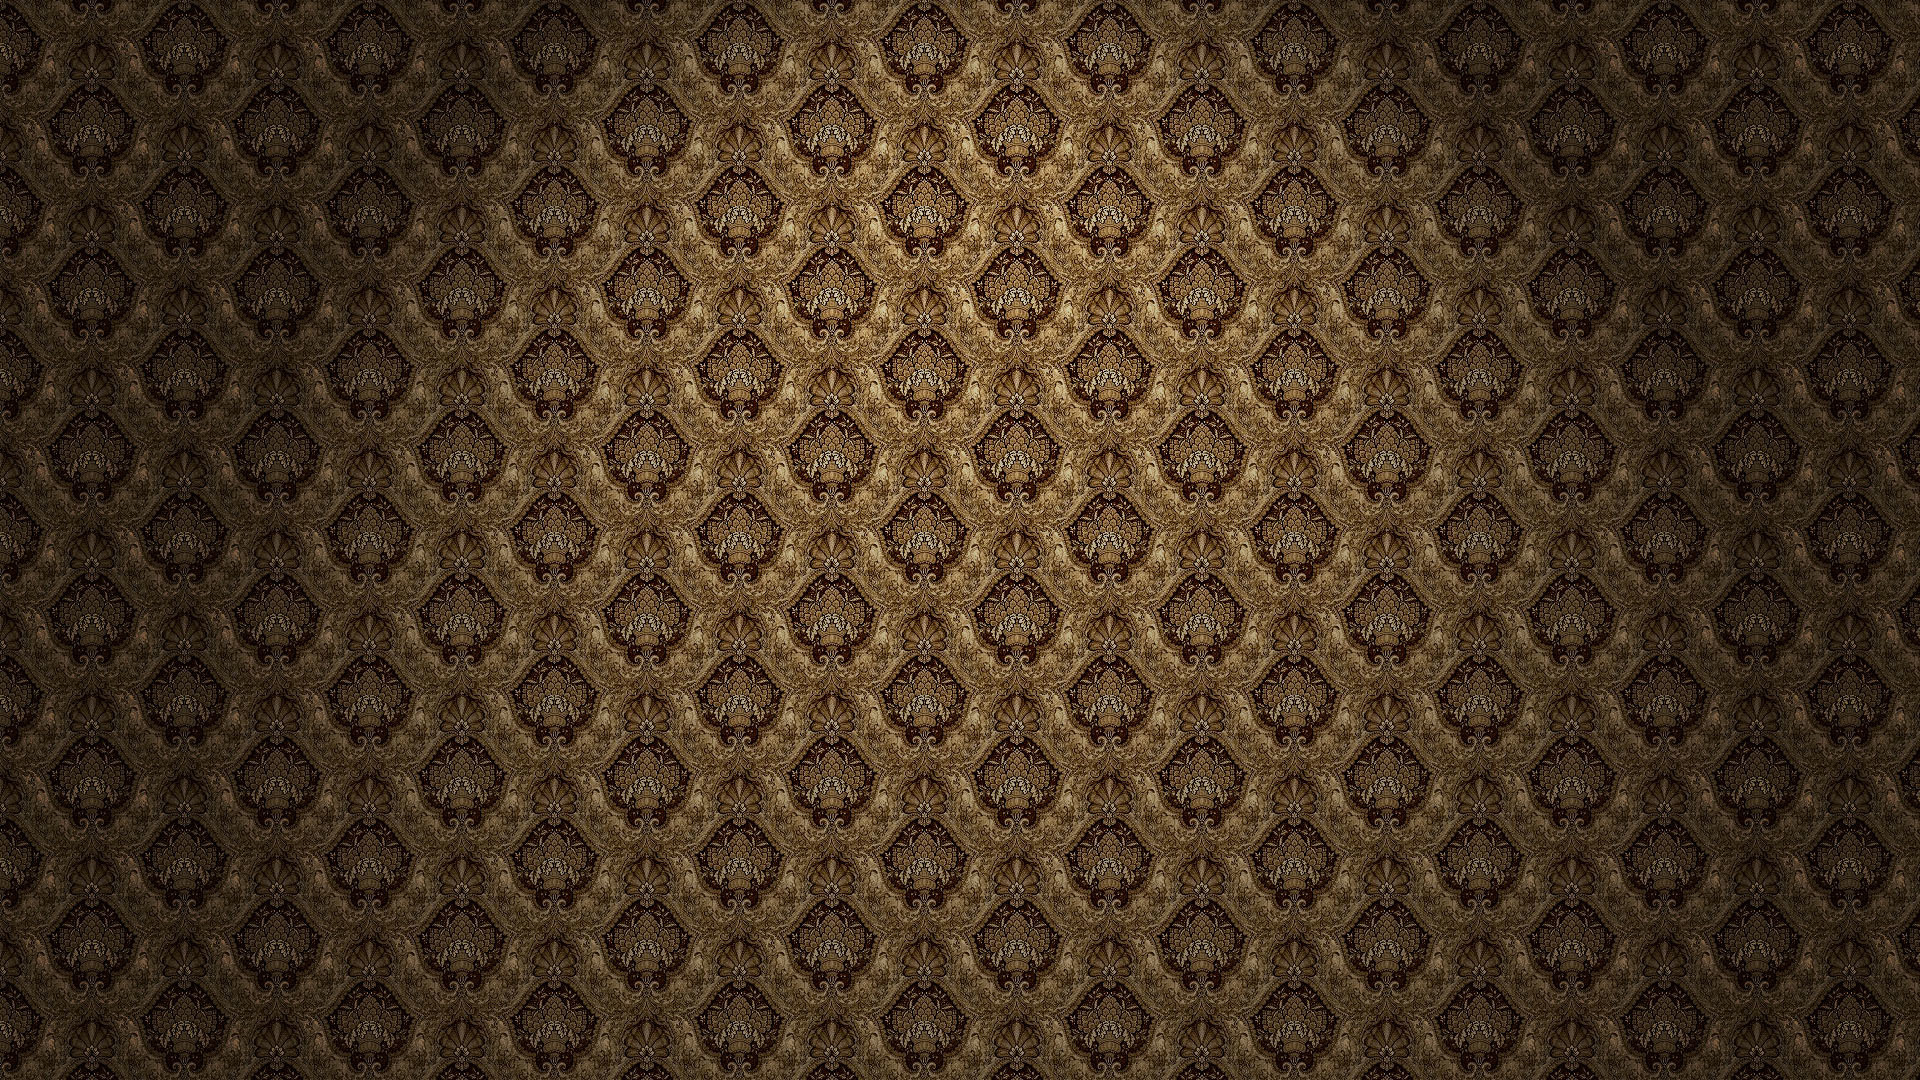 1920x1080 ... like these are very interesting to me. There's a definite rhythm and  feeling to this wastepaper. It feels very warm due to the orange/brown color .